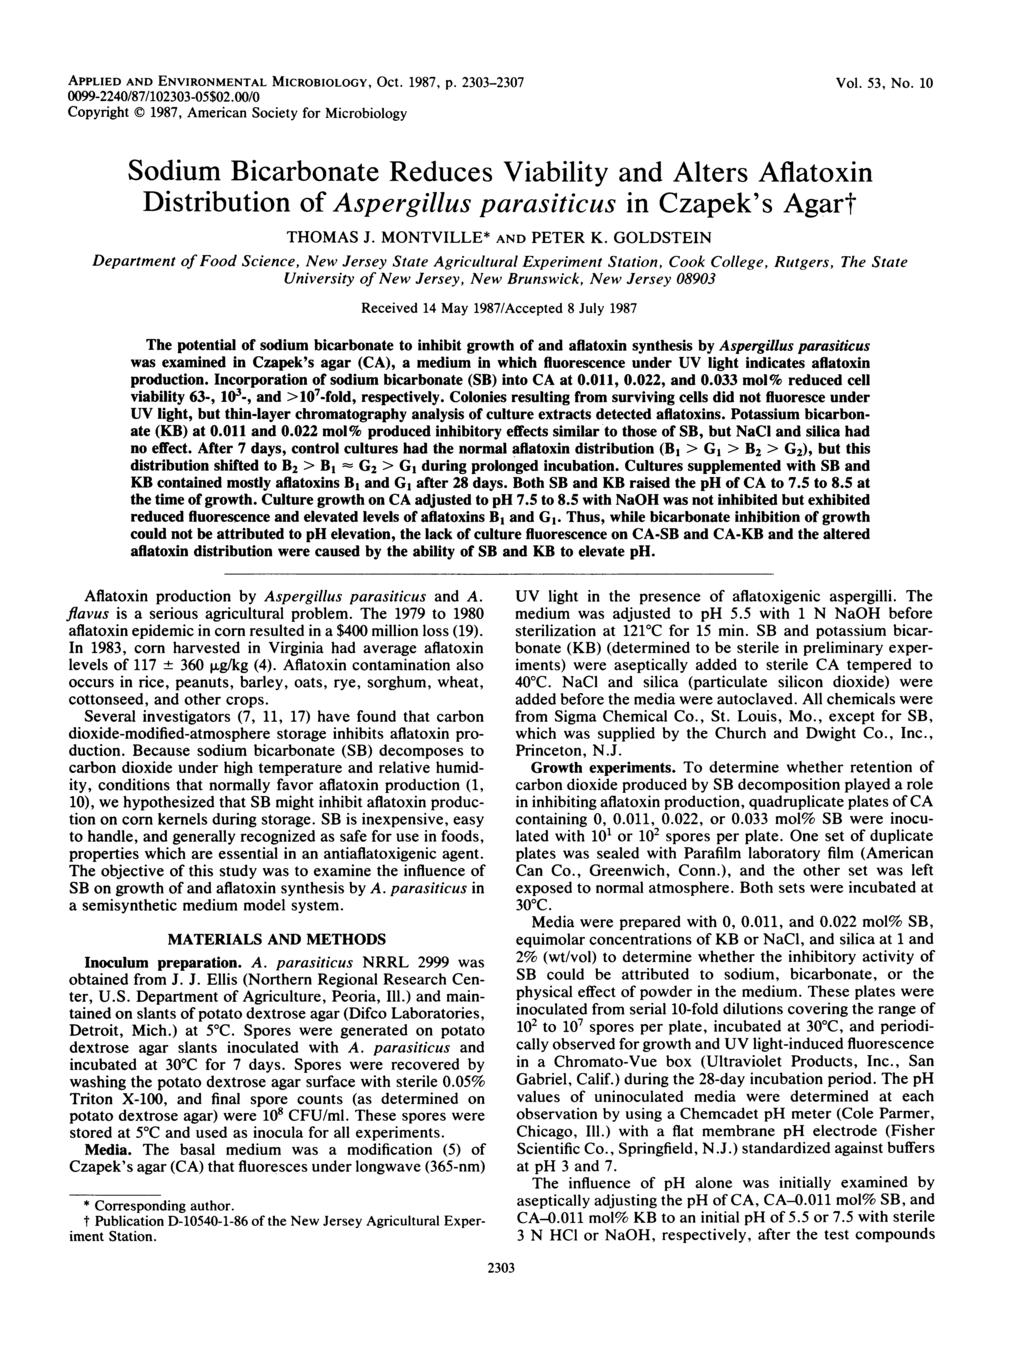 APPLIED AND ENVIRONMENTAL MICROBIOLOGY, OCt. 1987, p. 233-237 99-224/87/1233-5$2./ Copyright 1987, American Society for Microbiology Vol. 53, No.